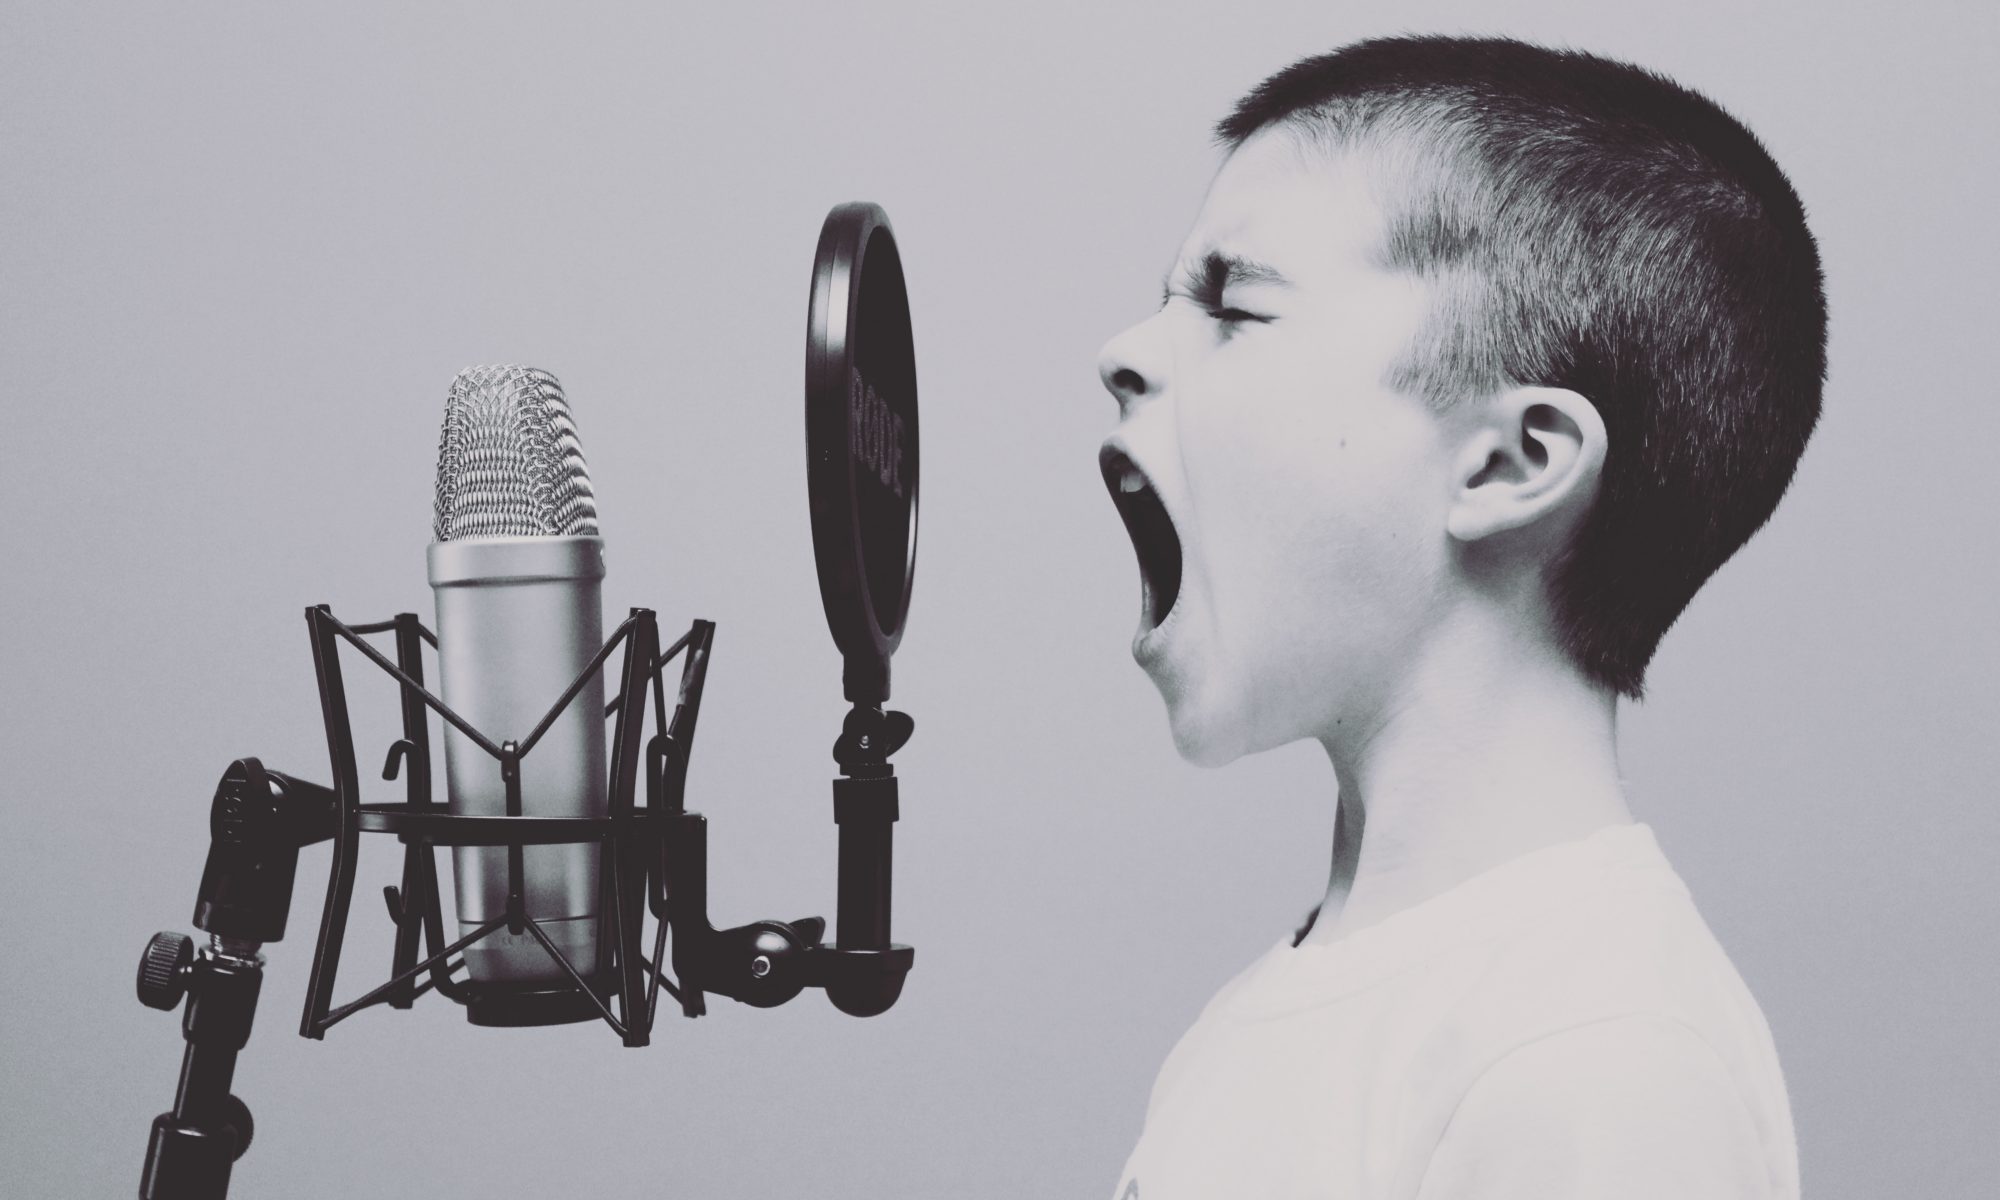 child screaming into recording microphone